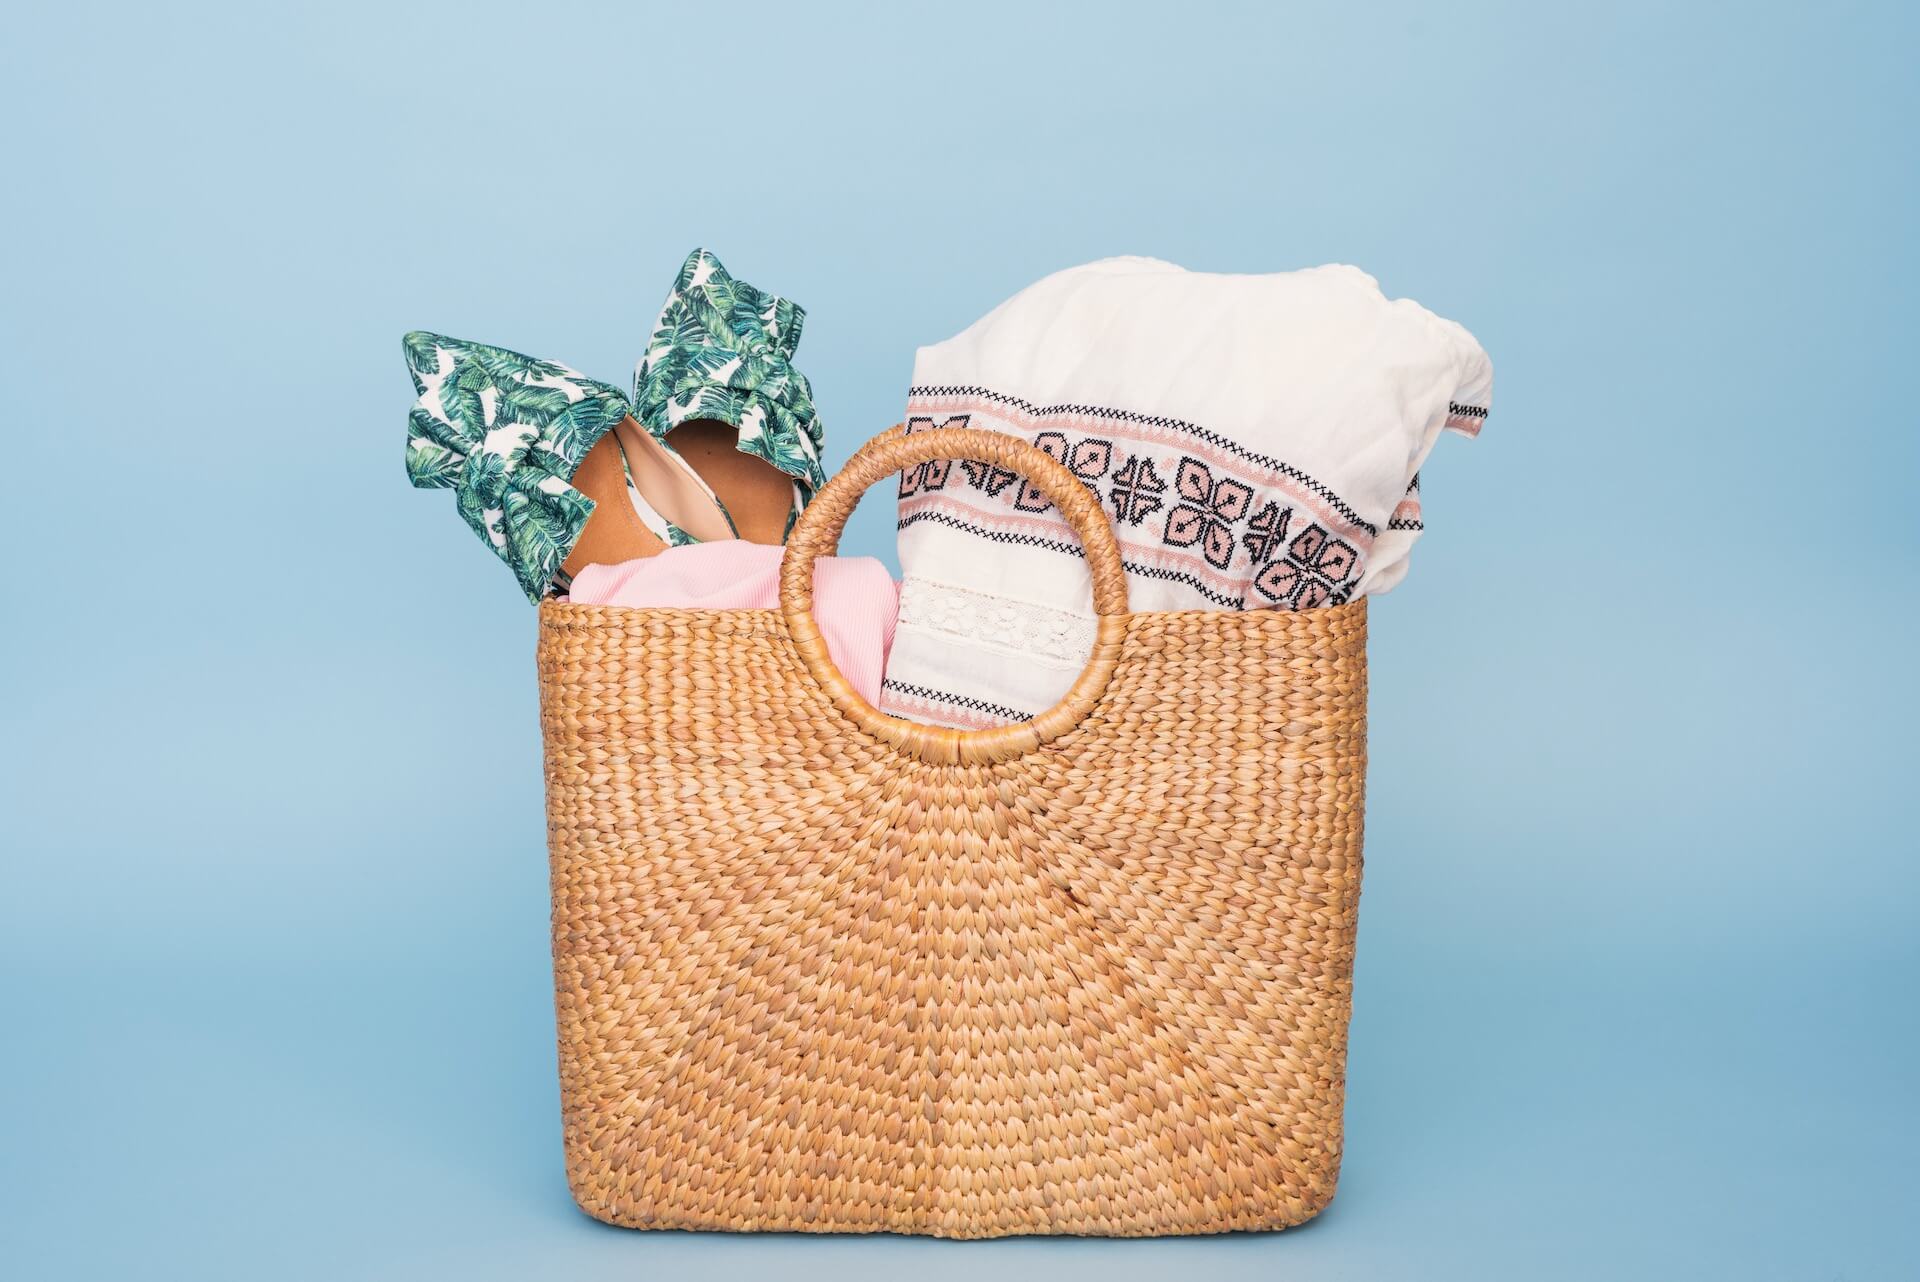  Towels and shoes in a beach basket